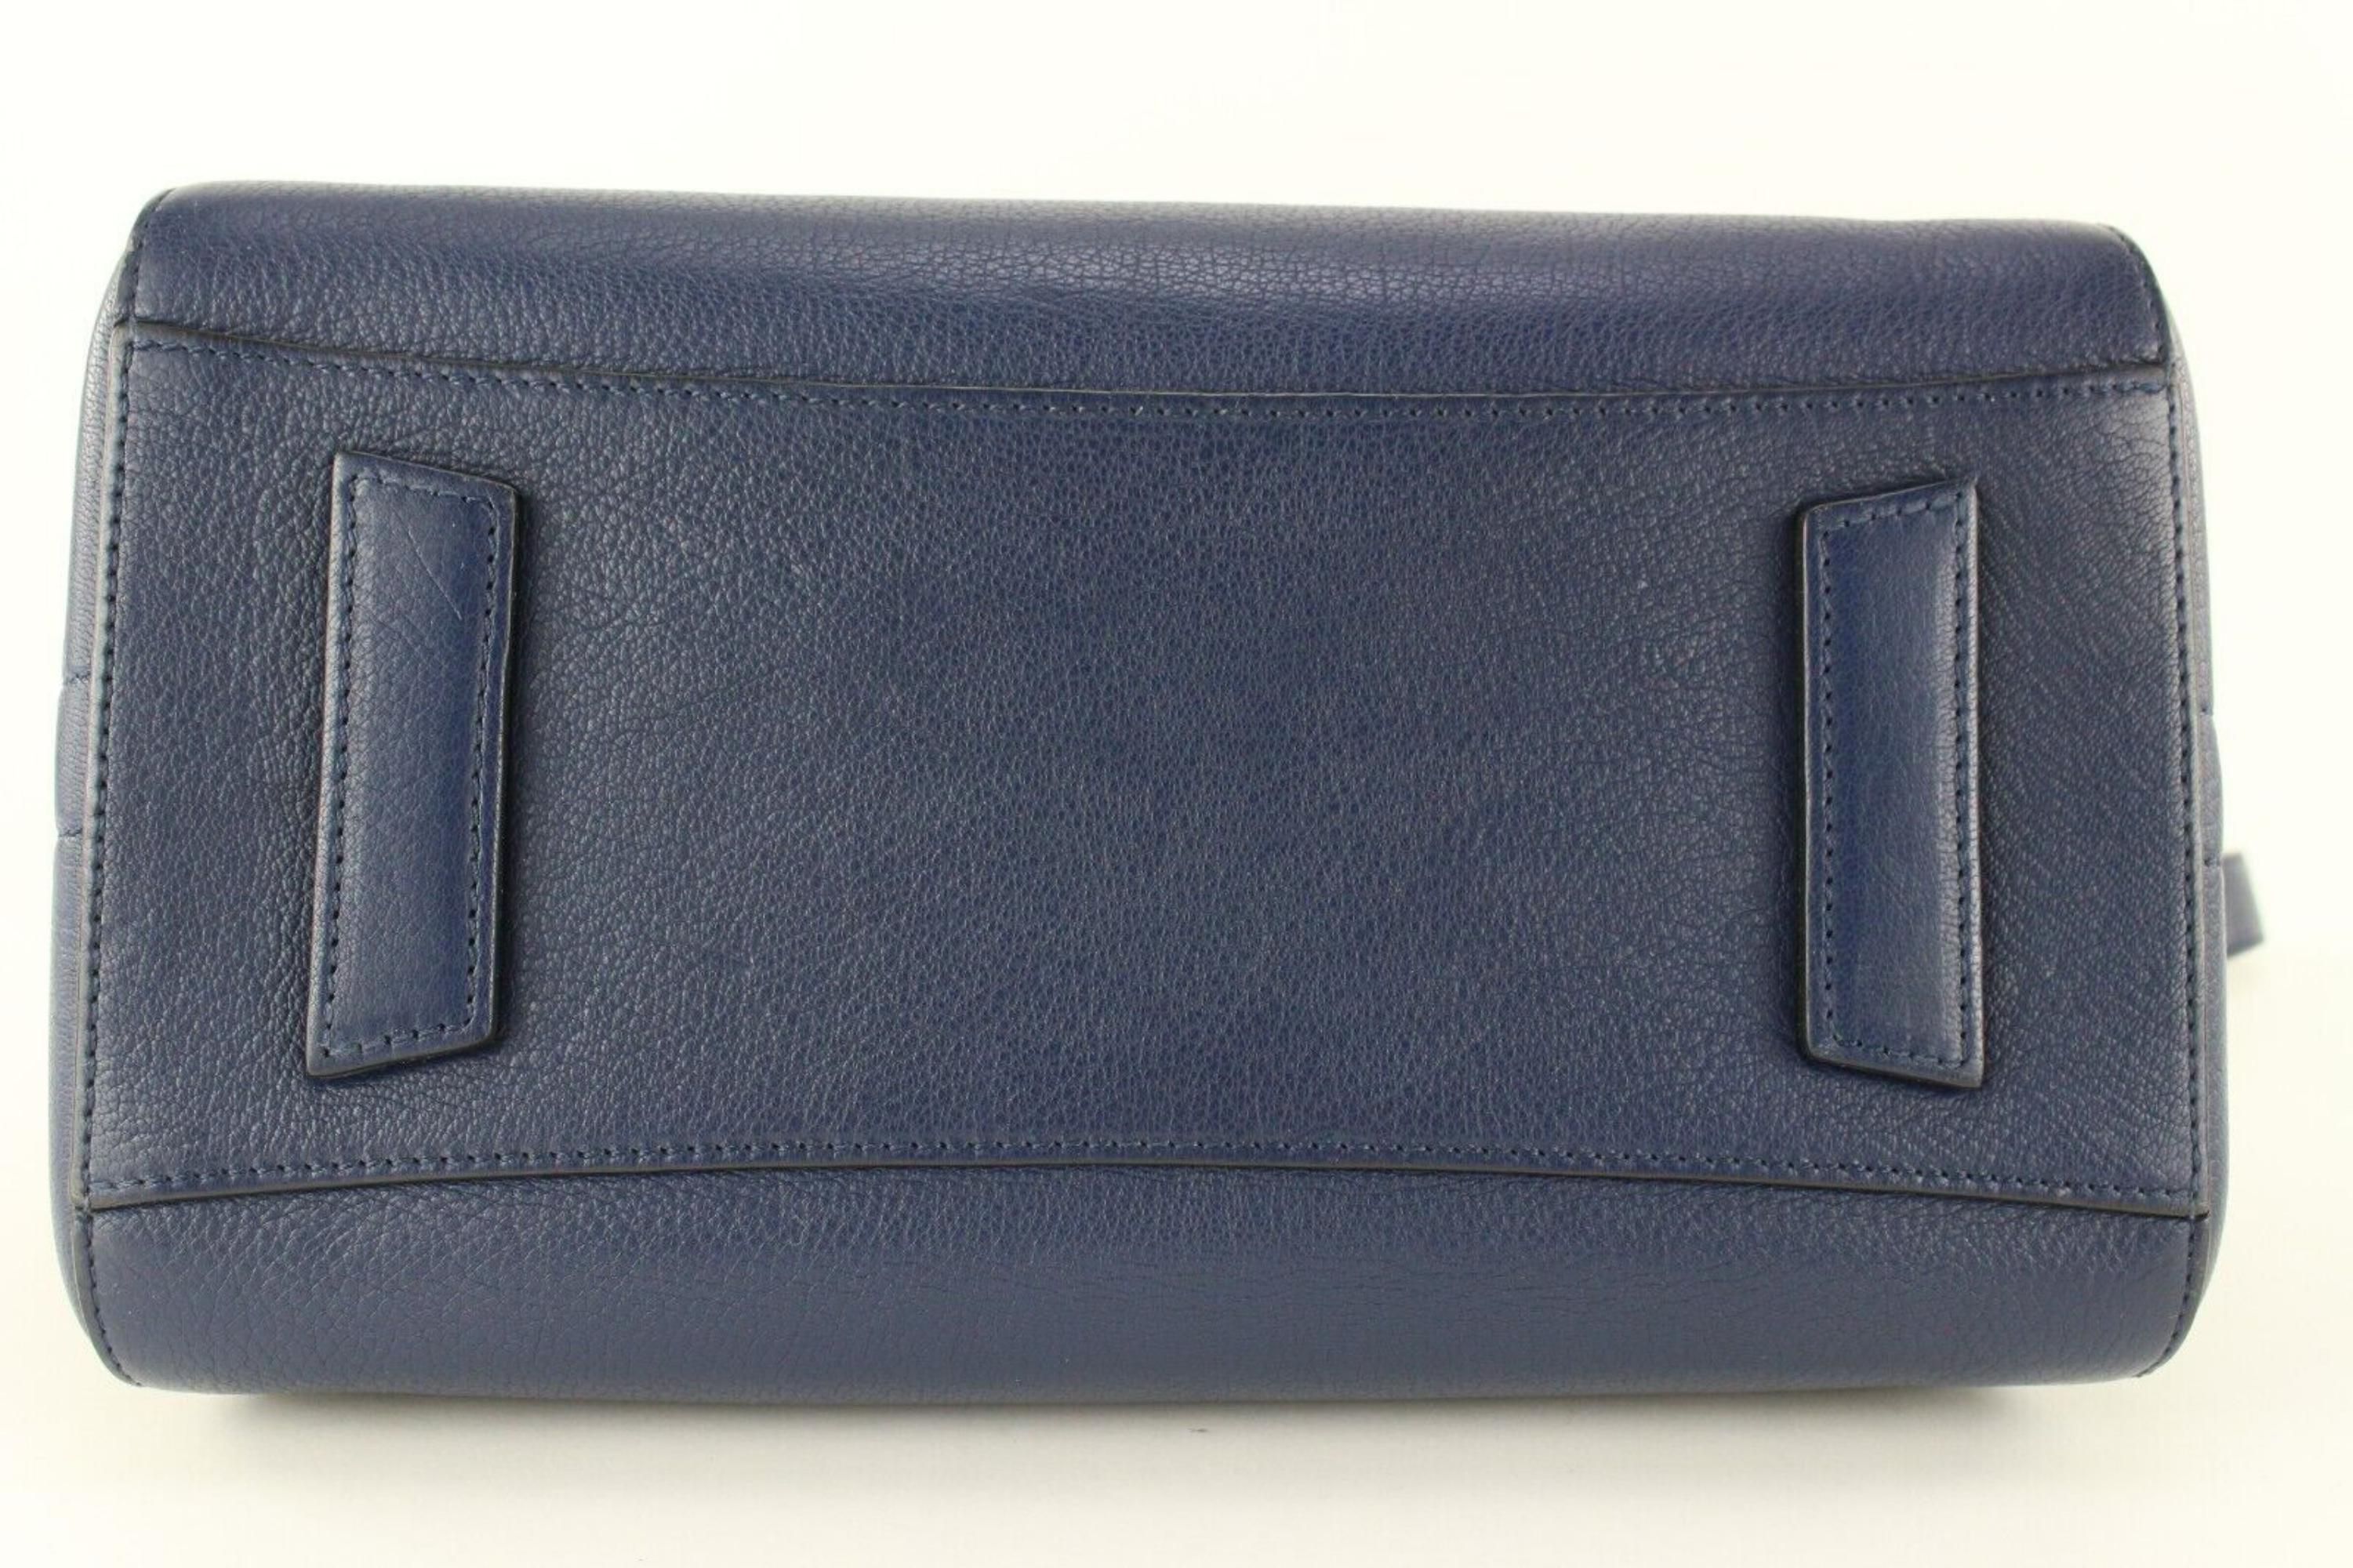 Givenchy Navy Blue Goatskin Leather Antigona Small 1GV1213
Date Code/Serial Number: ZED0155

Made In: Italy

Measurements: Length: 11 